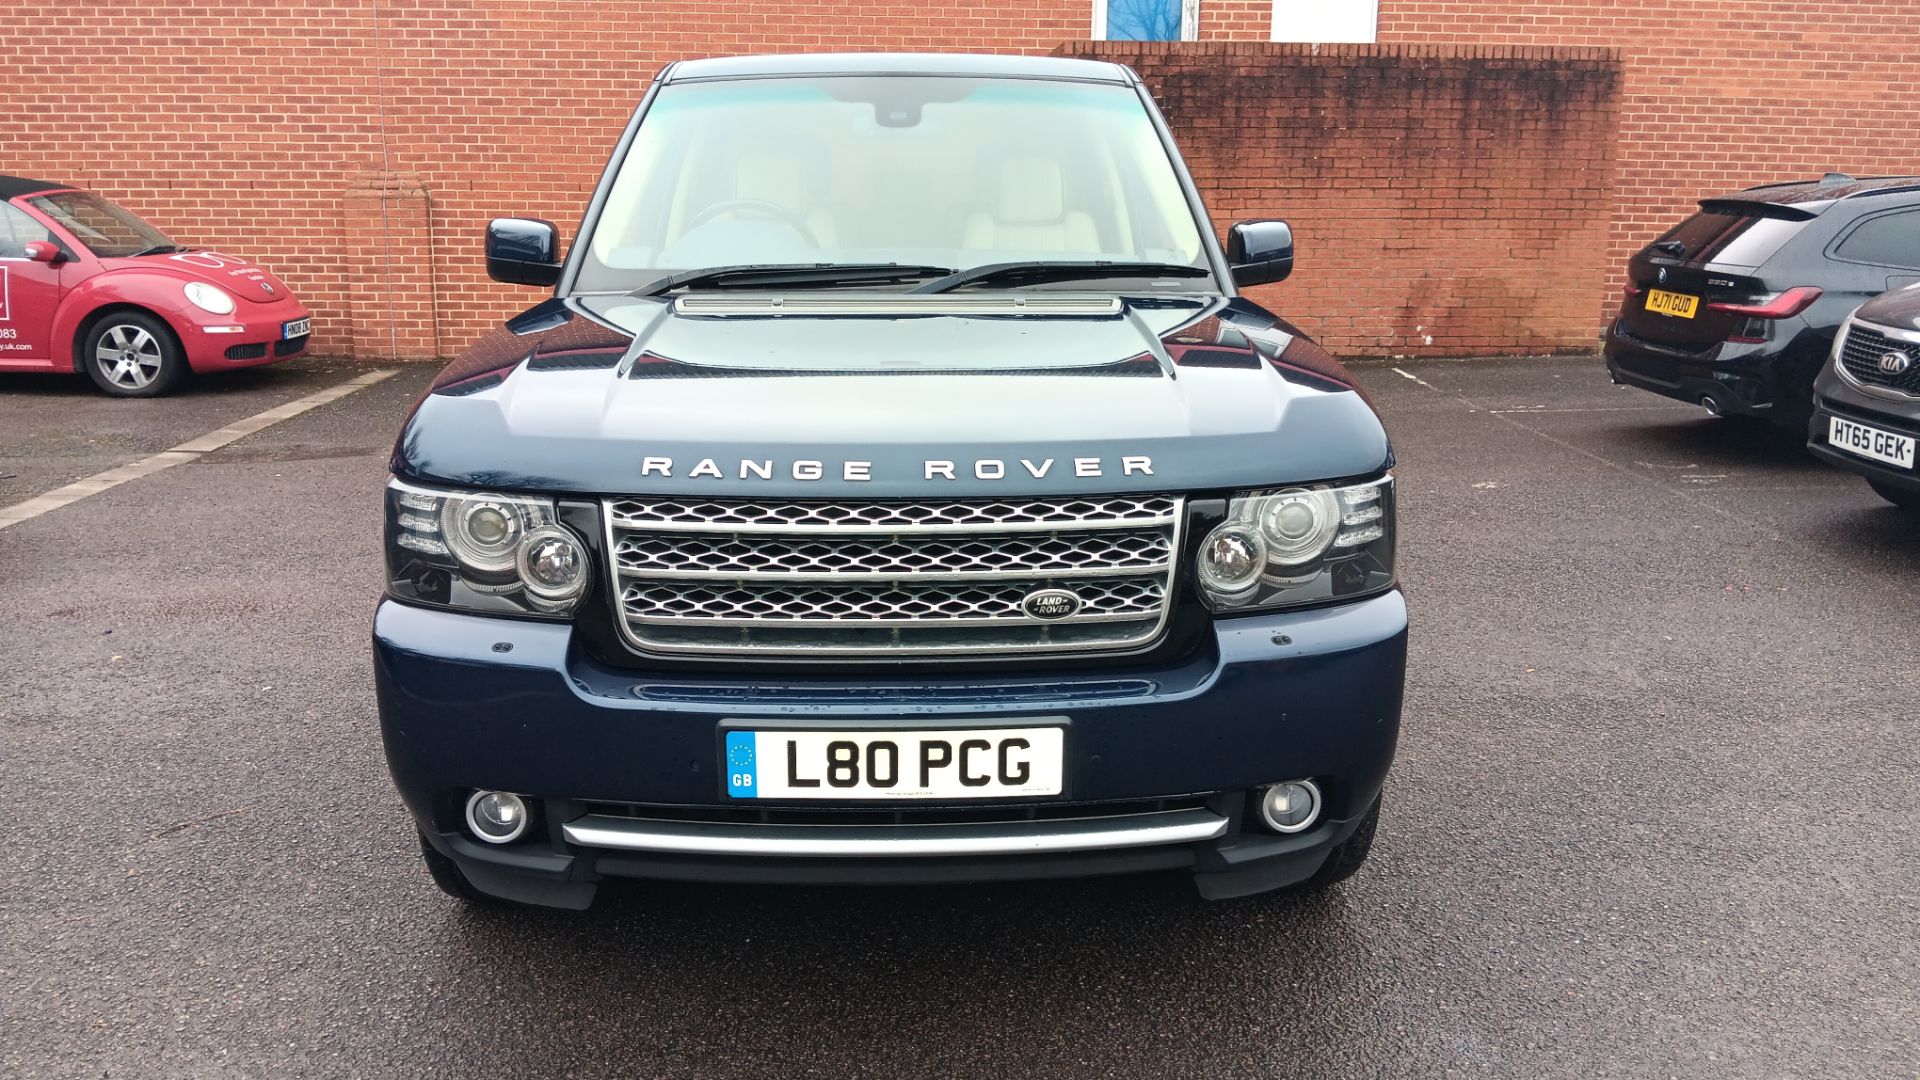 Land Rover Range Rover Special Editions 4.4 TDV8 Westminster 4dr 8 speed Auto, Registration L80 PCG - Image 2 of 28